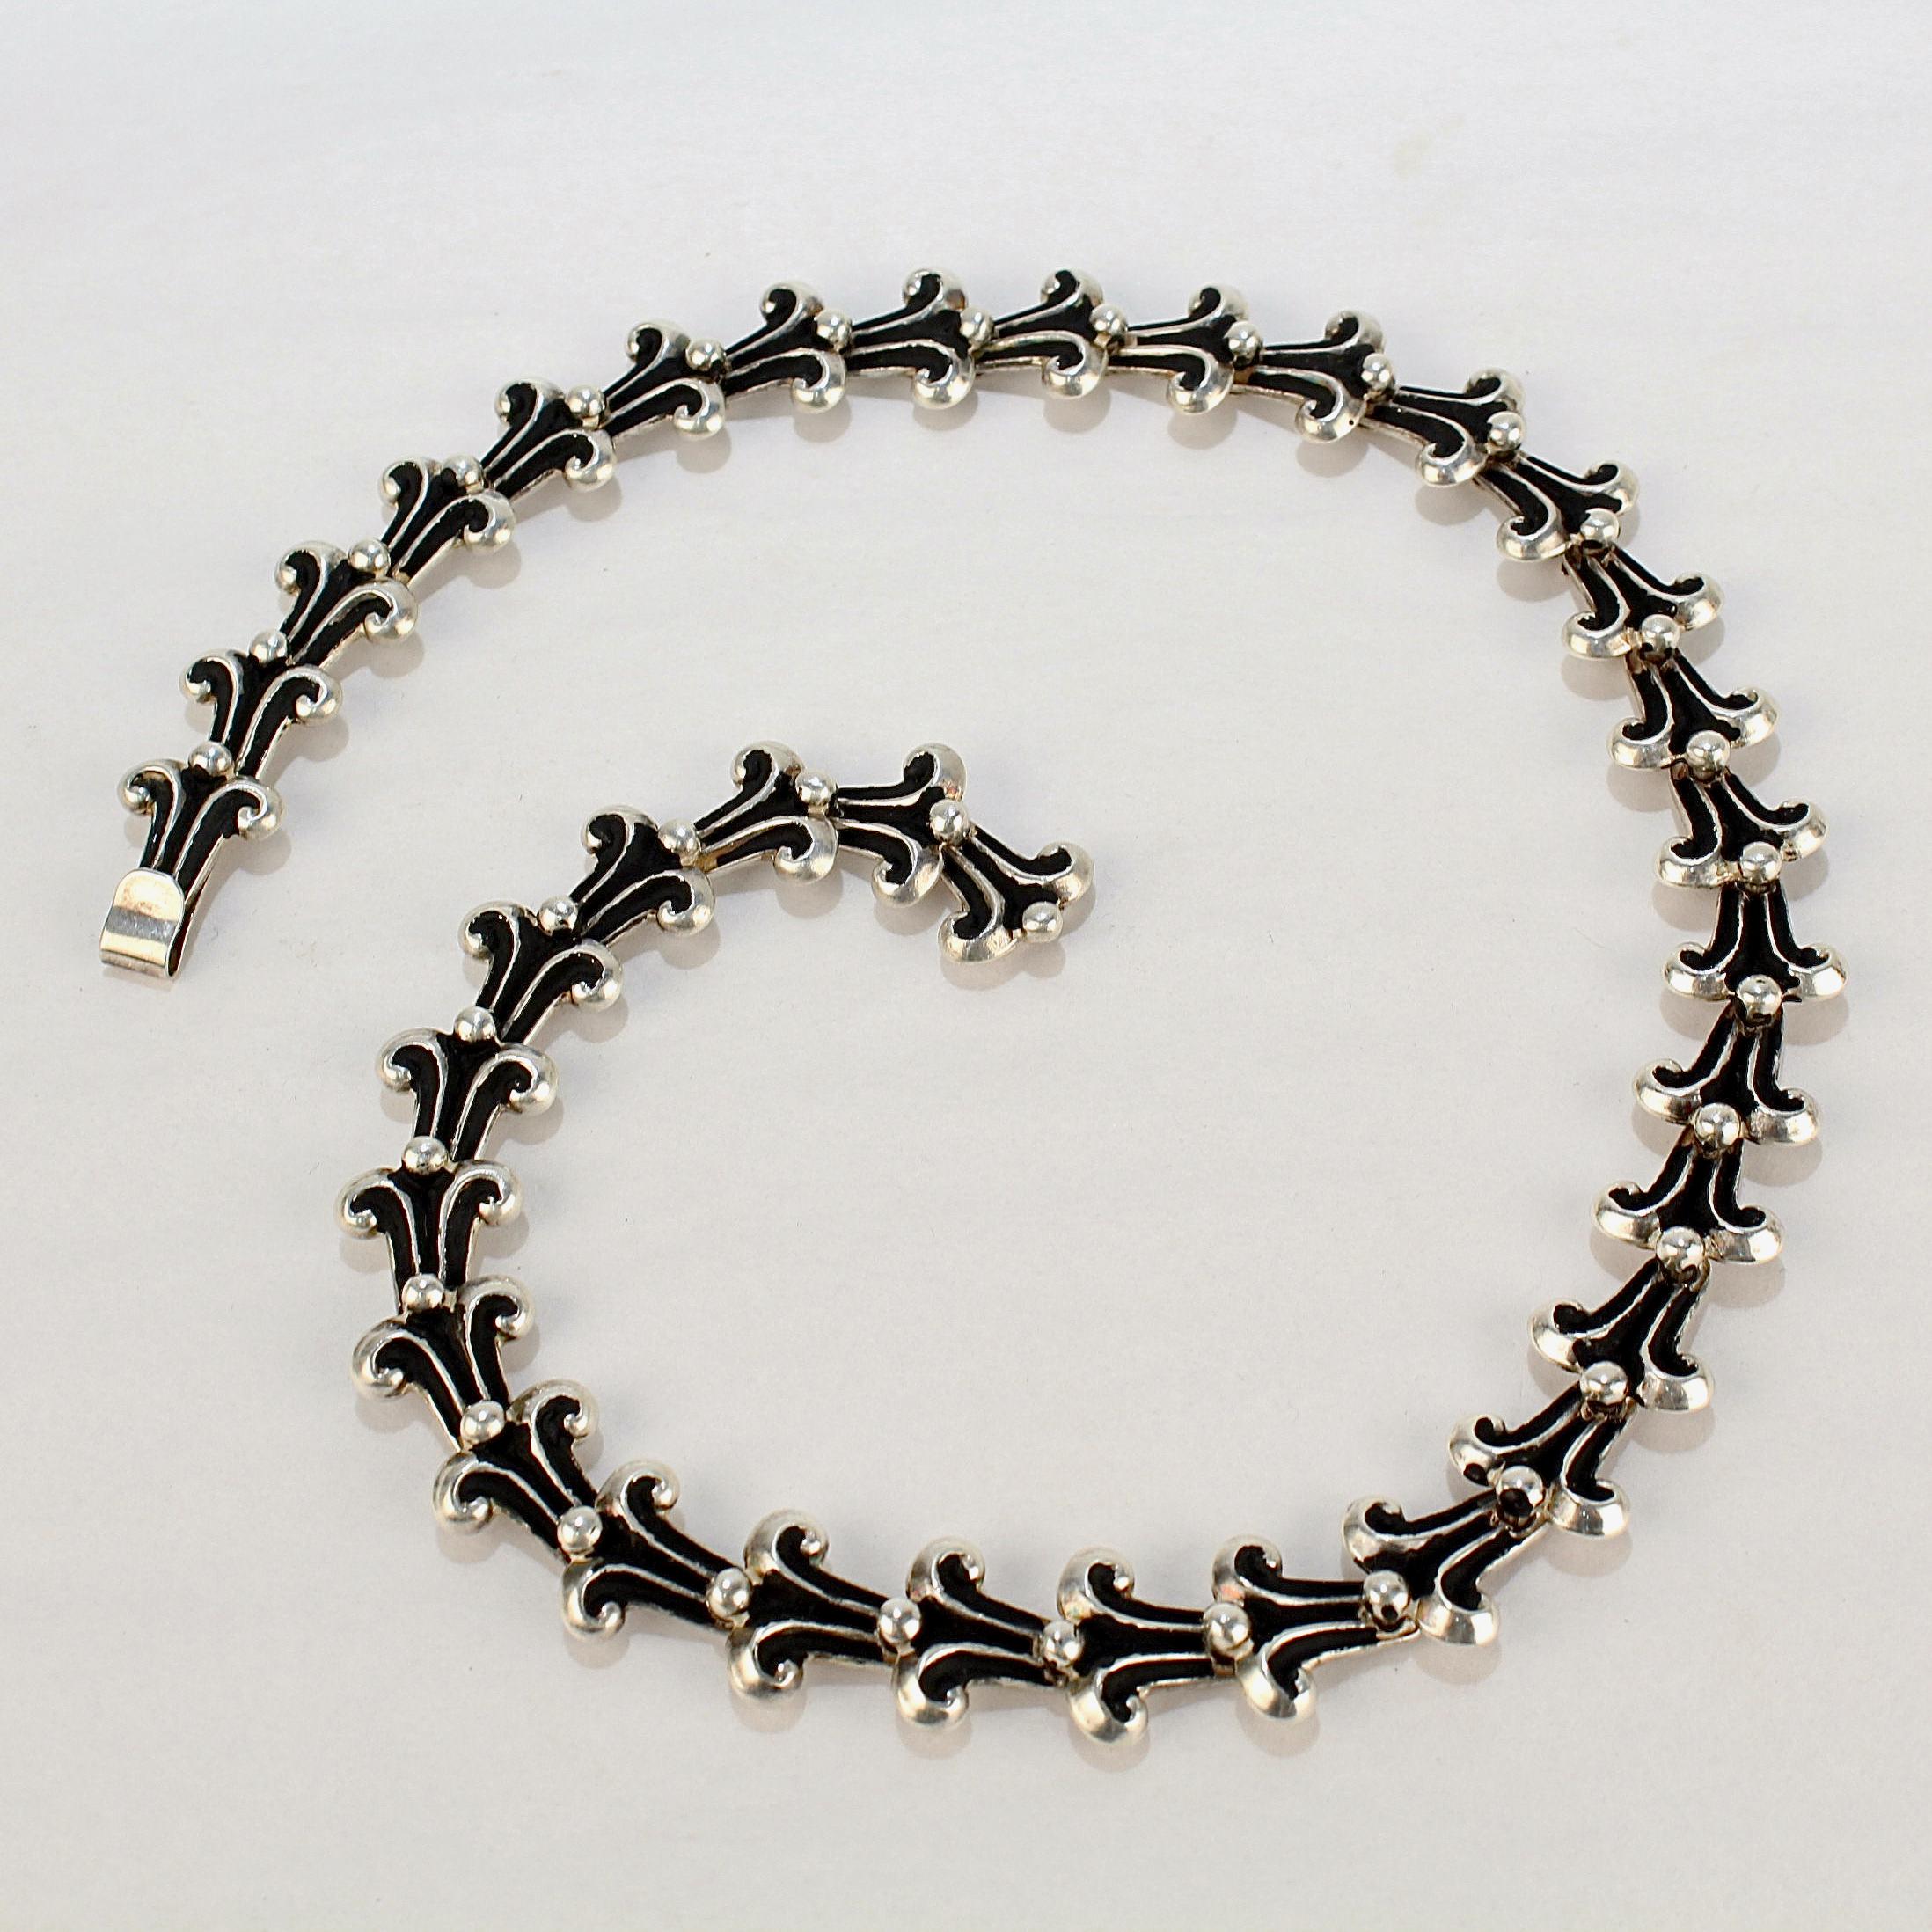 A very fine Mexican sterling silver necklace.

By Los Castillo. 

With architecturally inspired links connected like a bicycle chain.

Simply great design from one of Mexico's top jewelry makers!

Date:
20th Century

Overall Condition:
It is in